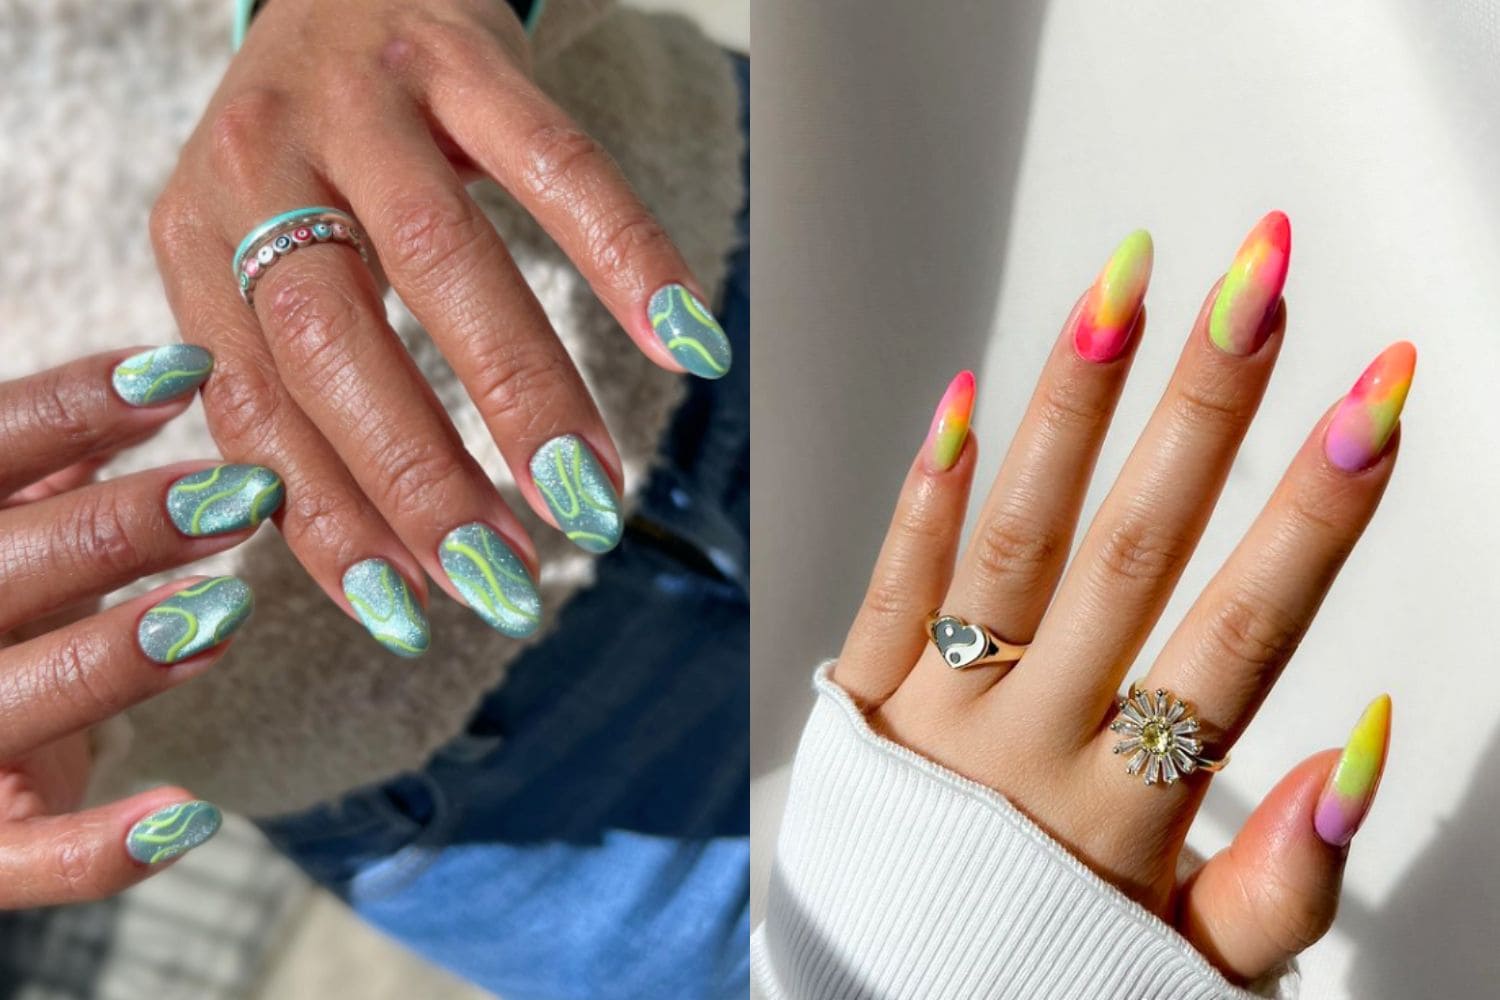 6. "Ombre nail colors for spring" - wide 5